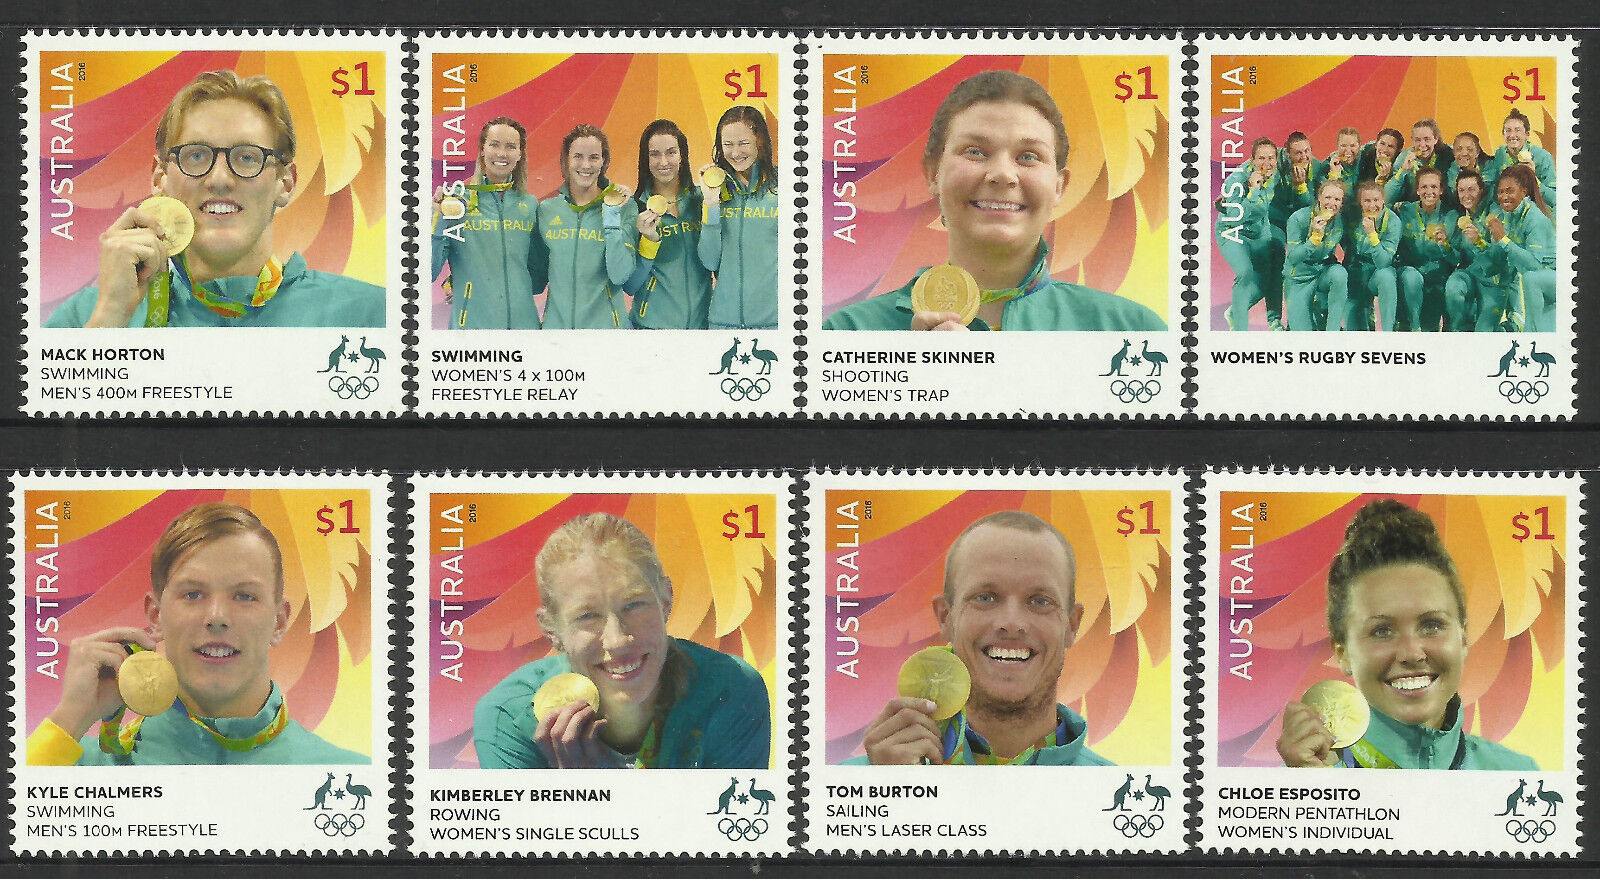 AUSTRALIA 2016 RIO OLYMPIC GAMES GOLD MEDAL WINNERS Complete Set of 8 MNH